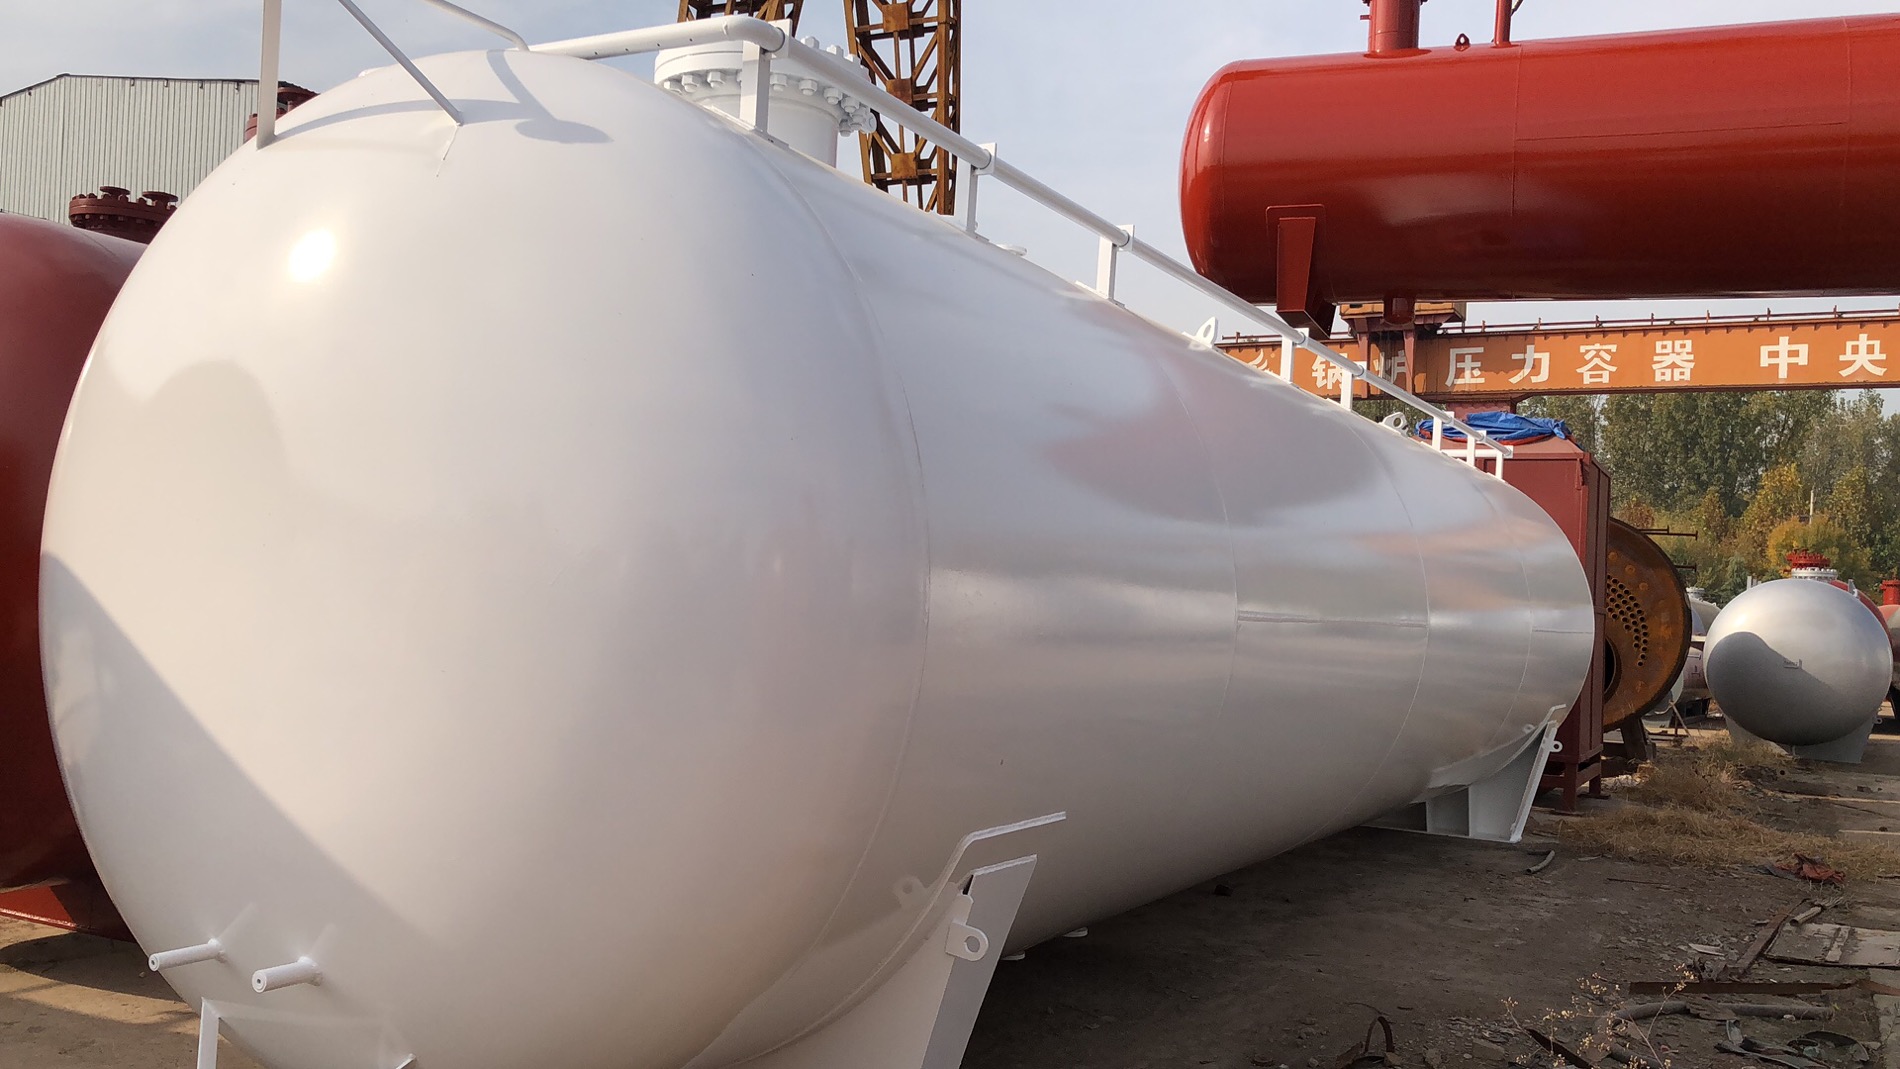 lpg tank Inspection and replacement of safety devices